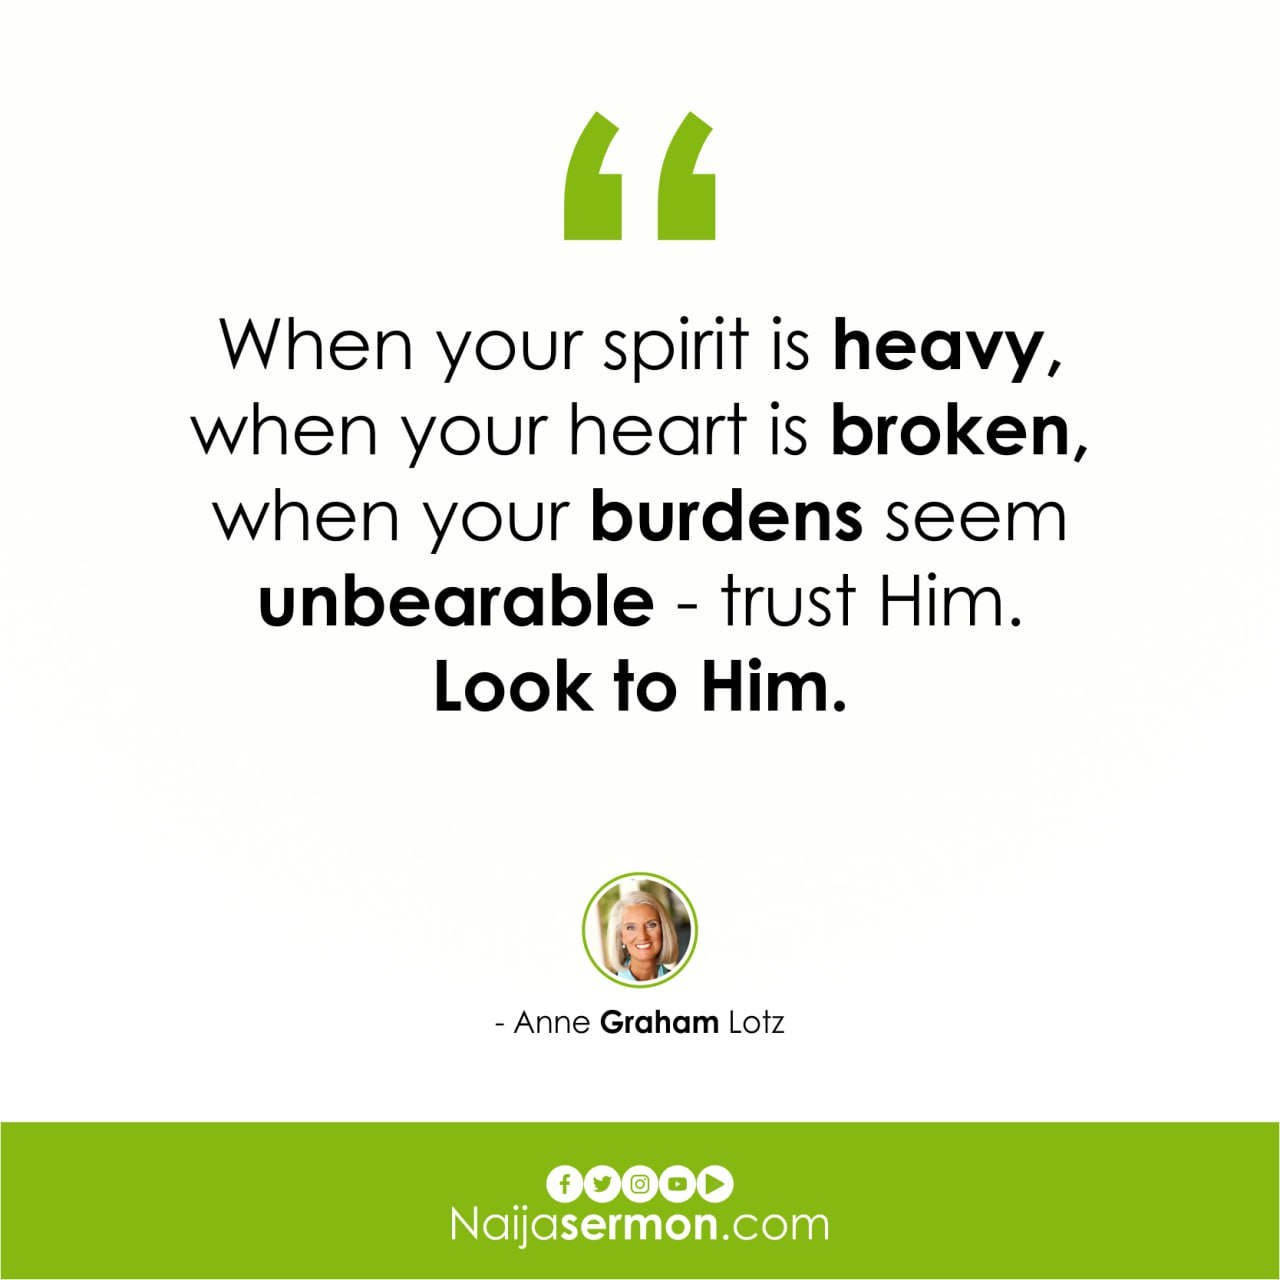 QUOTE OF THE DAY BY ANNE GRAHAM LOTZ 18